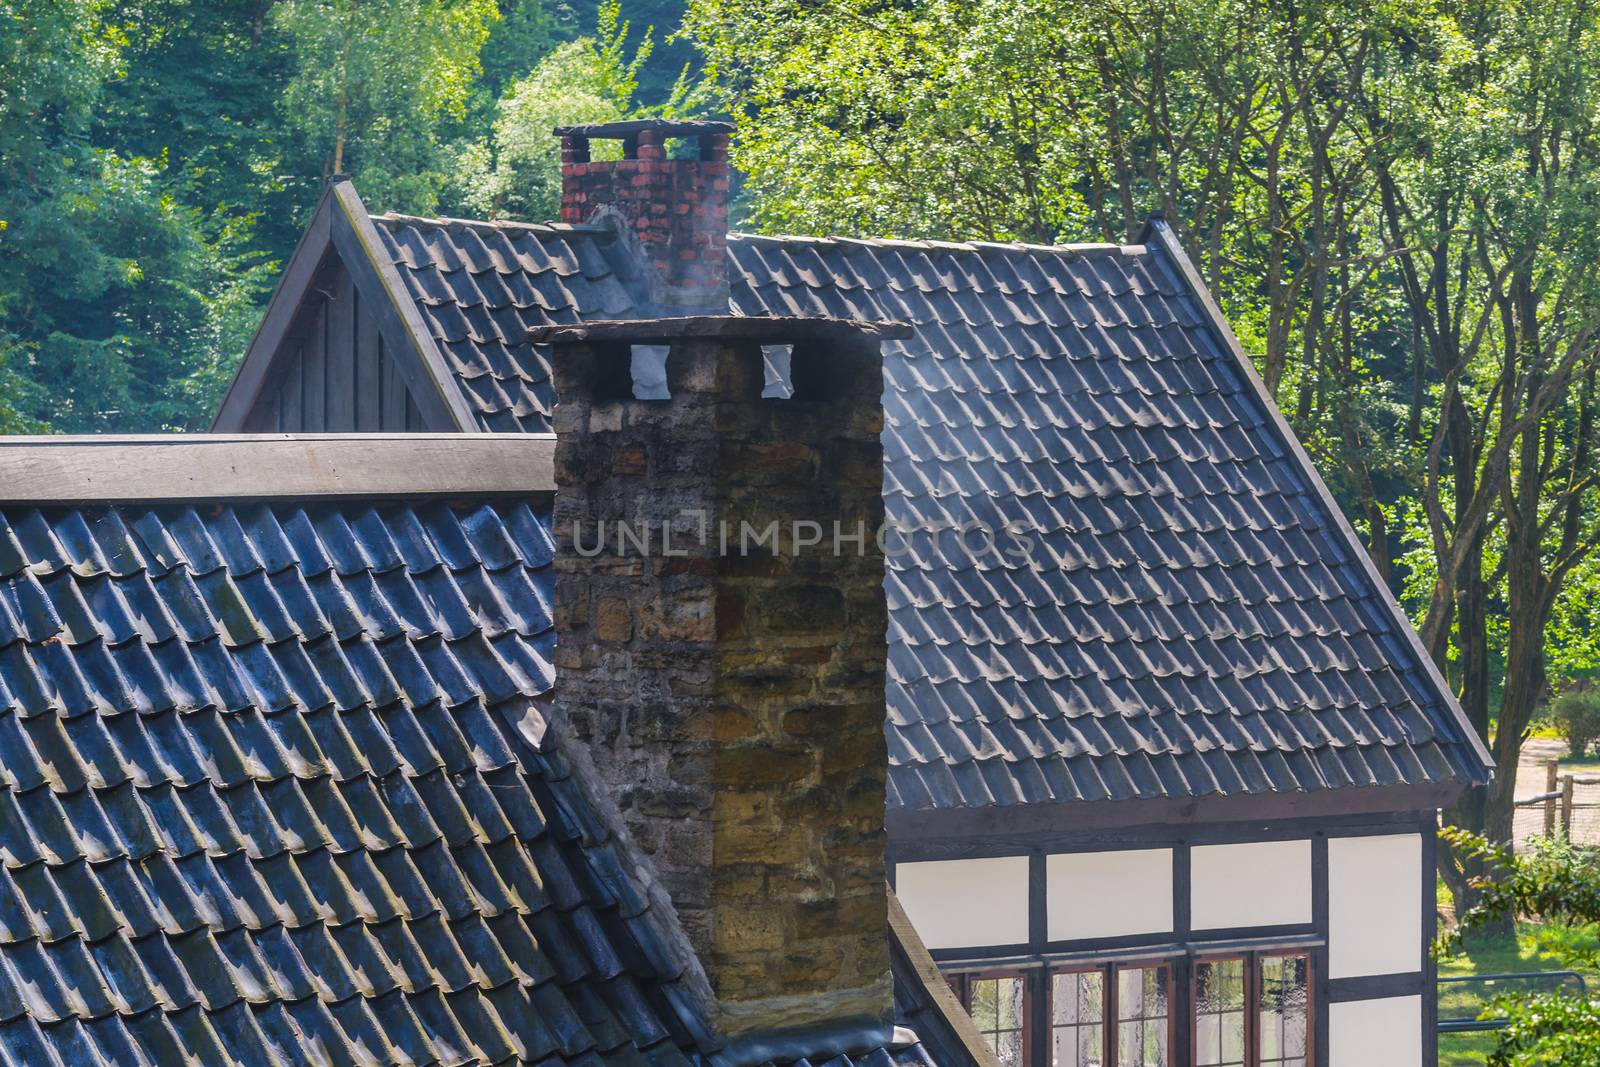 Smoking chimney on the roof of a house.